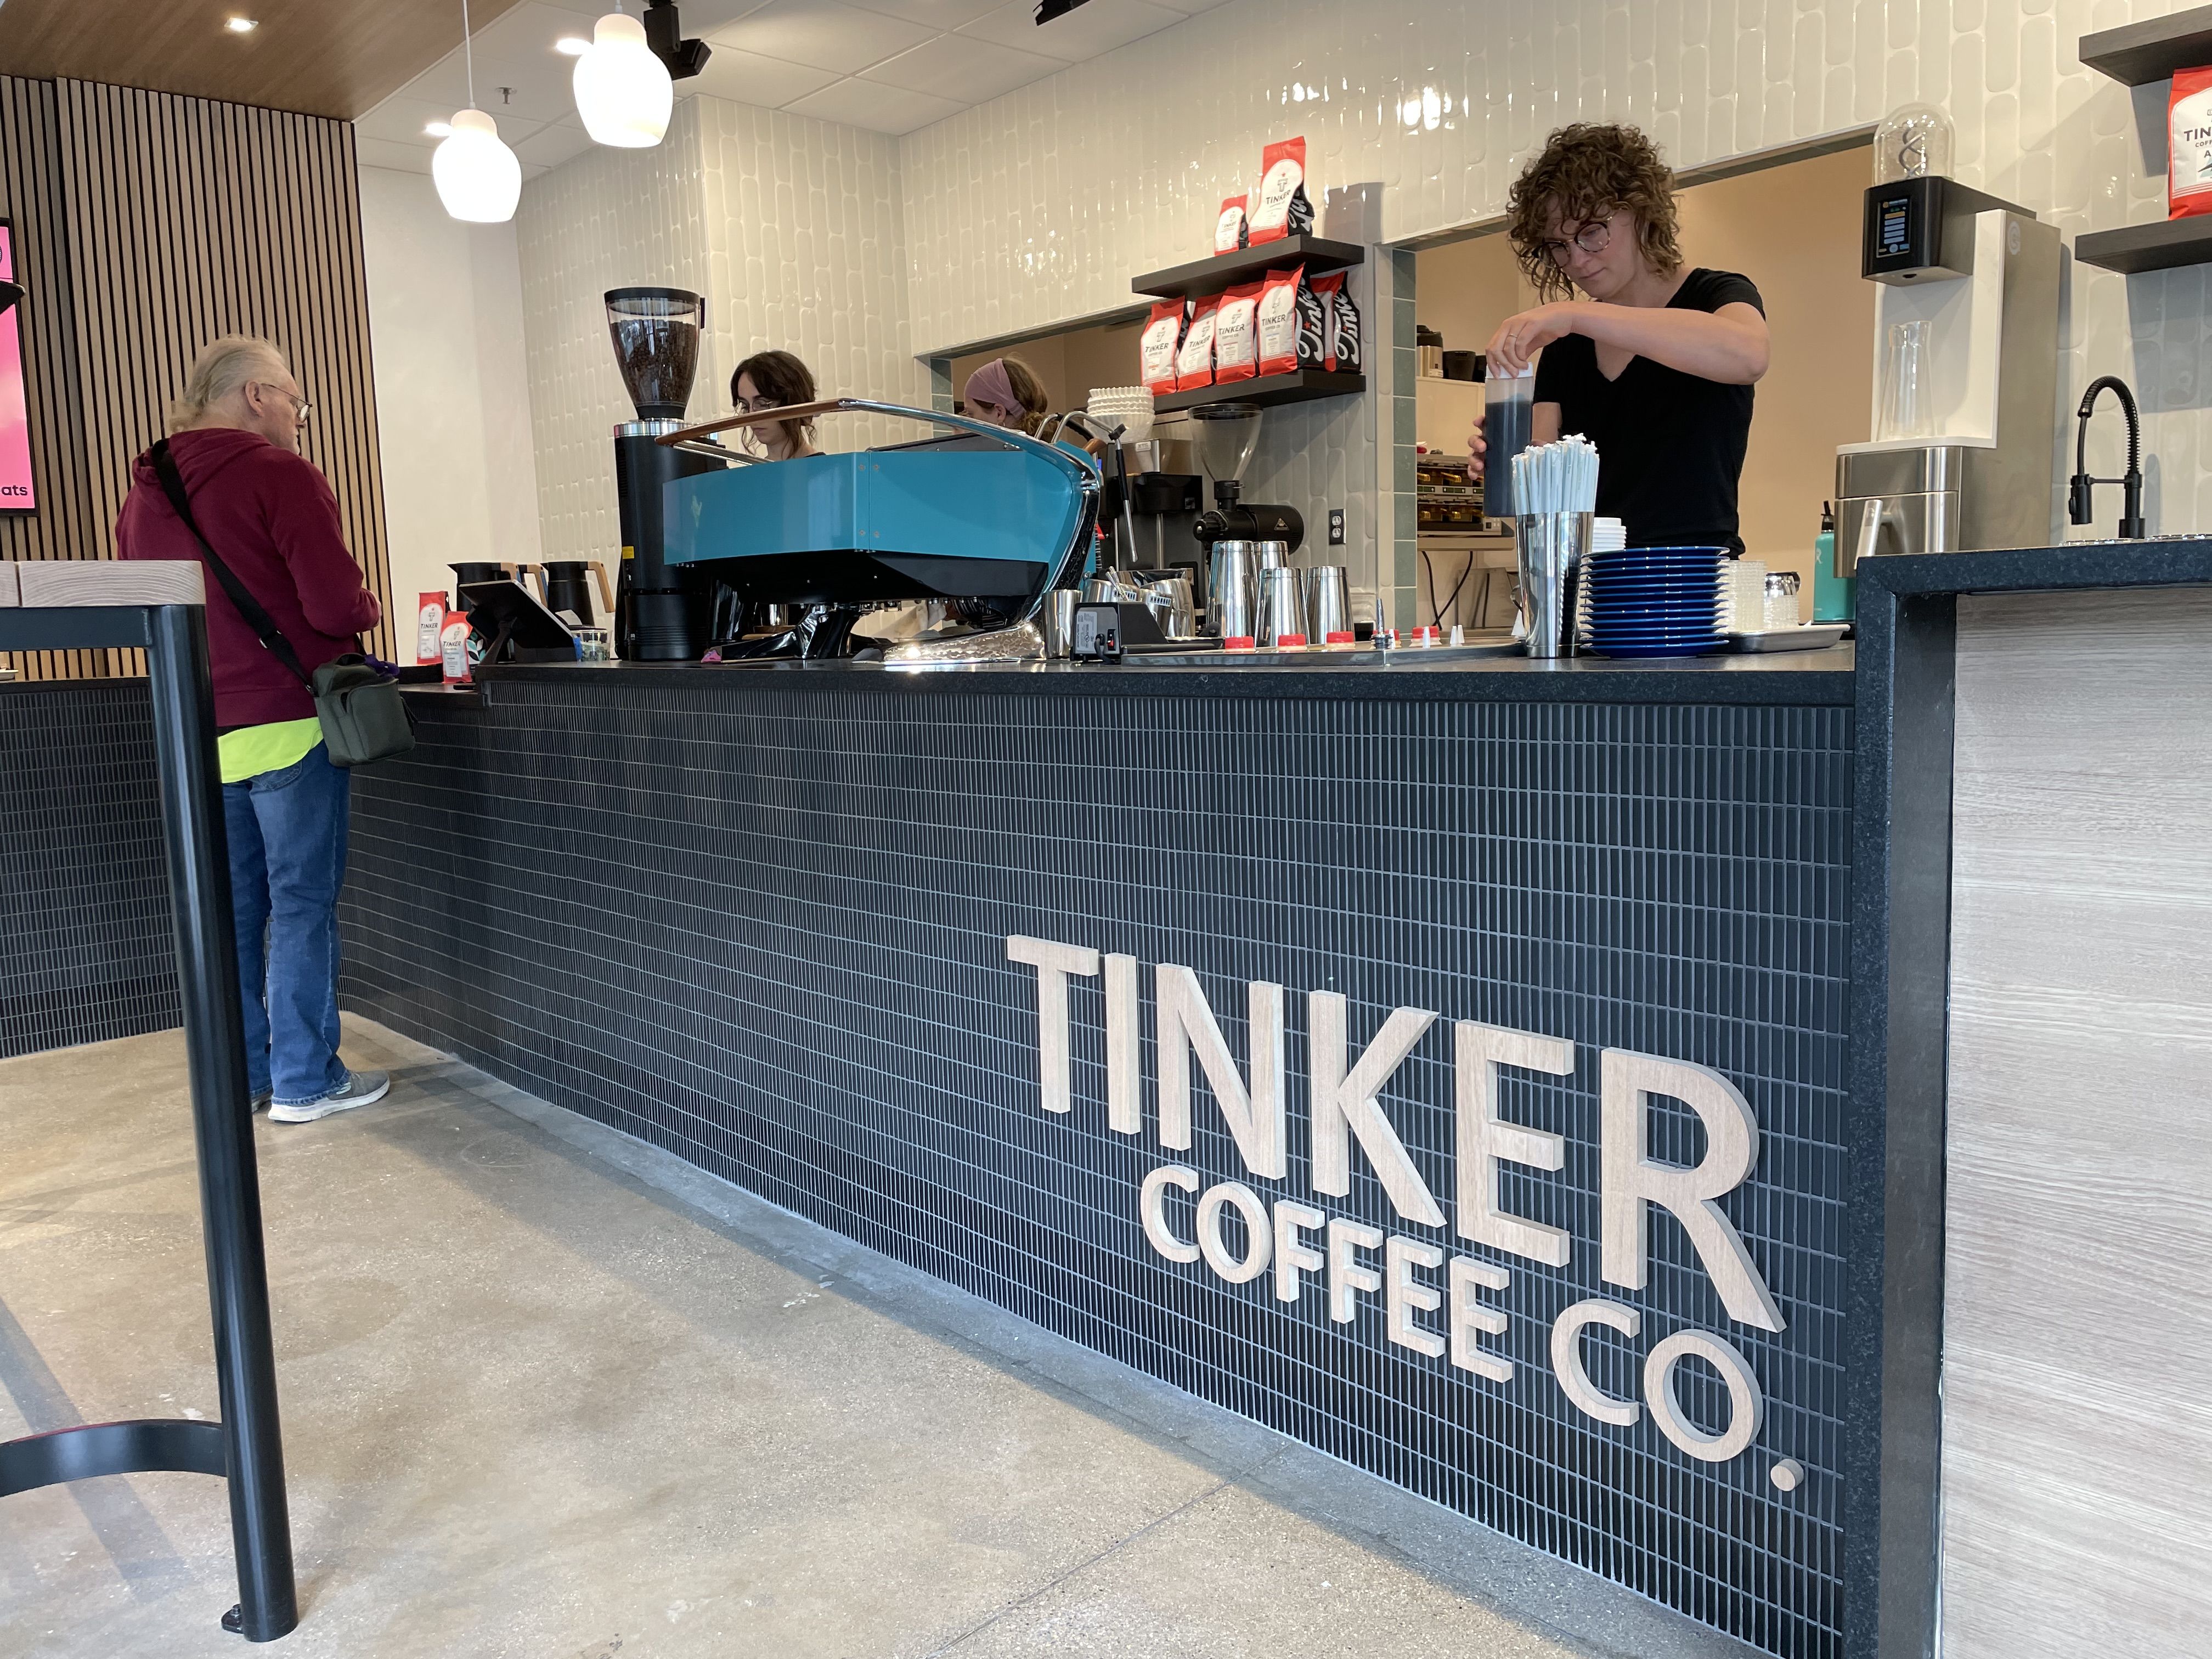 Baristas prepare drinks behind the counter inside the Tinker Coffee shop in downtown Indianapolis.